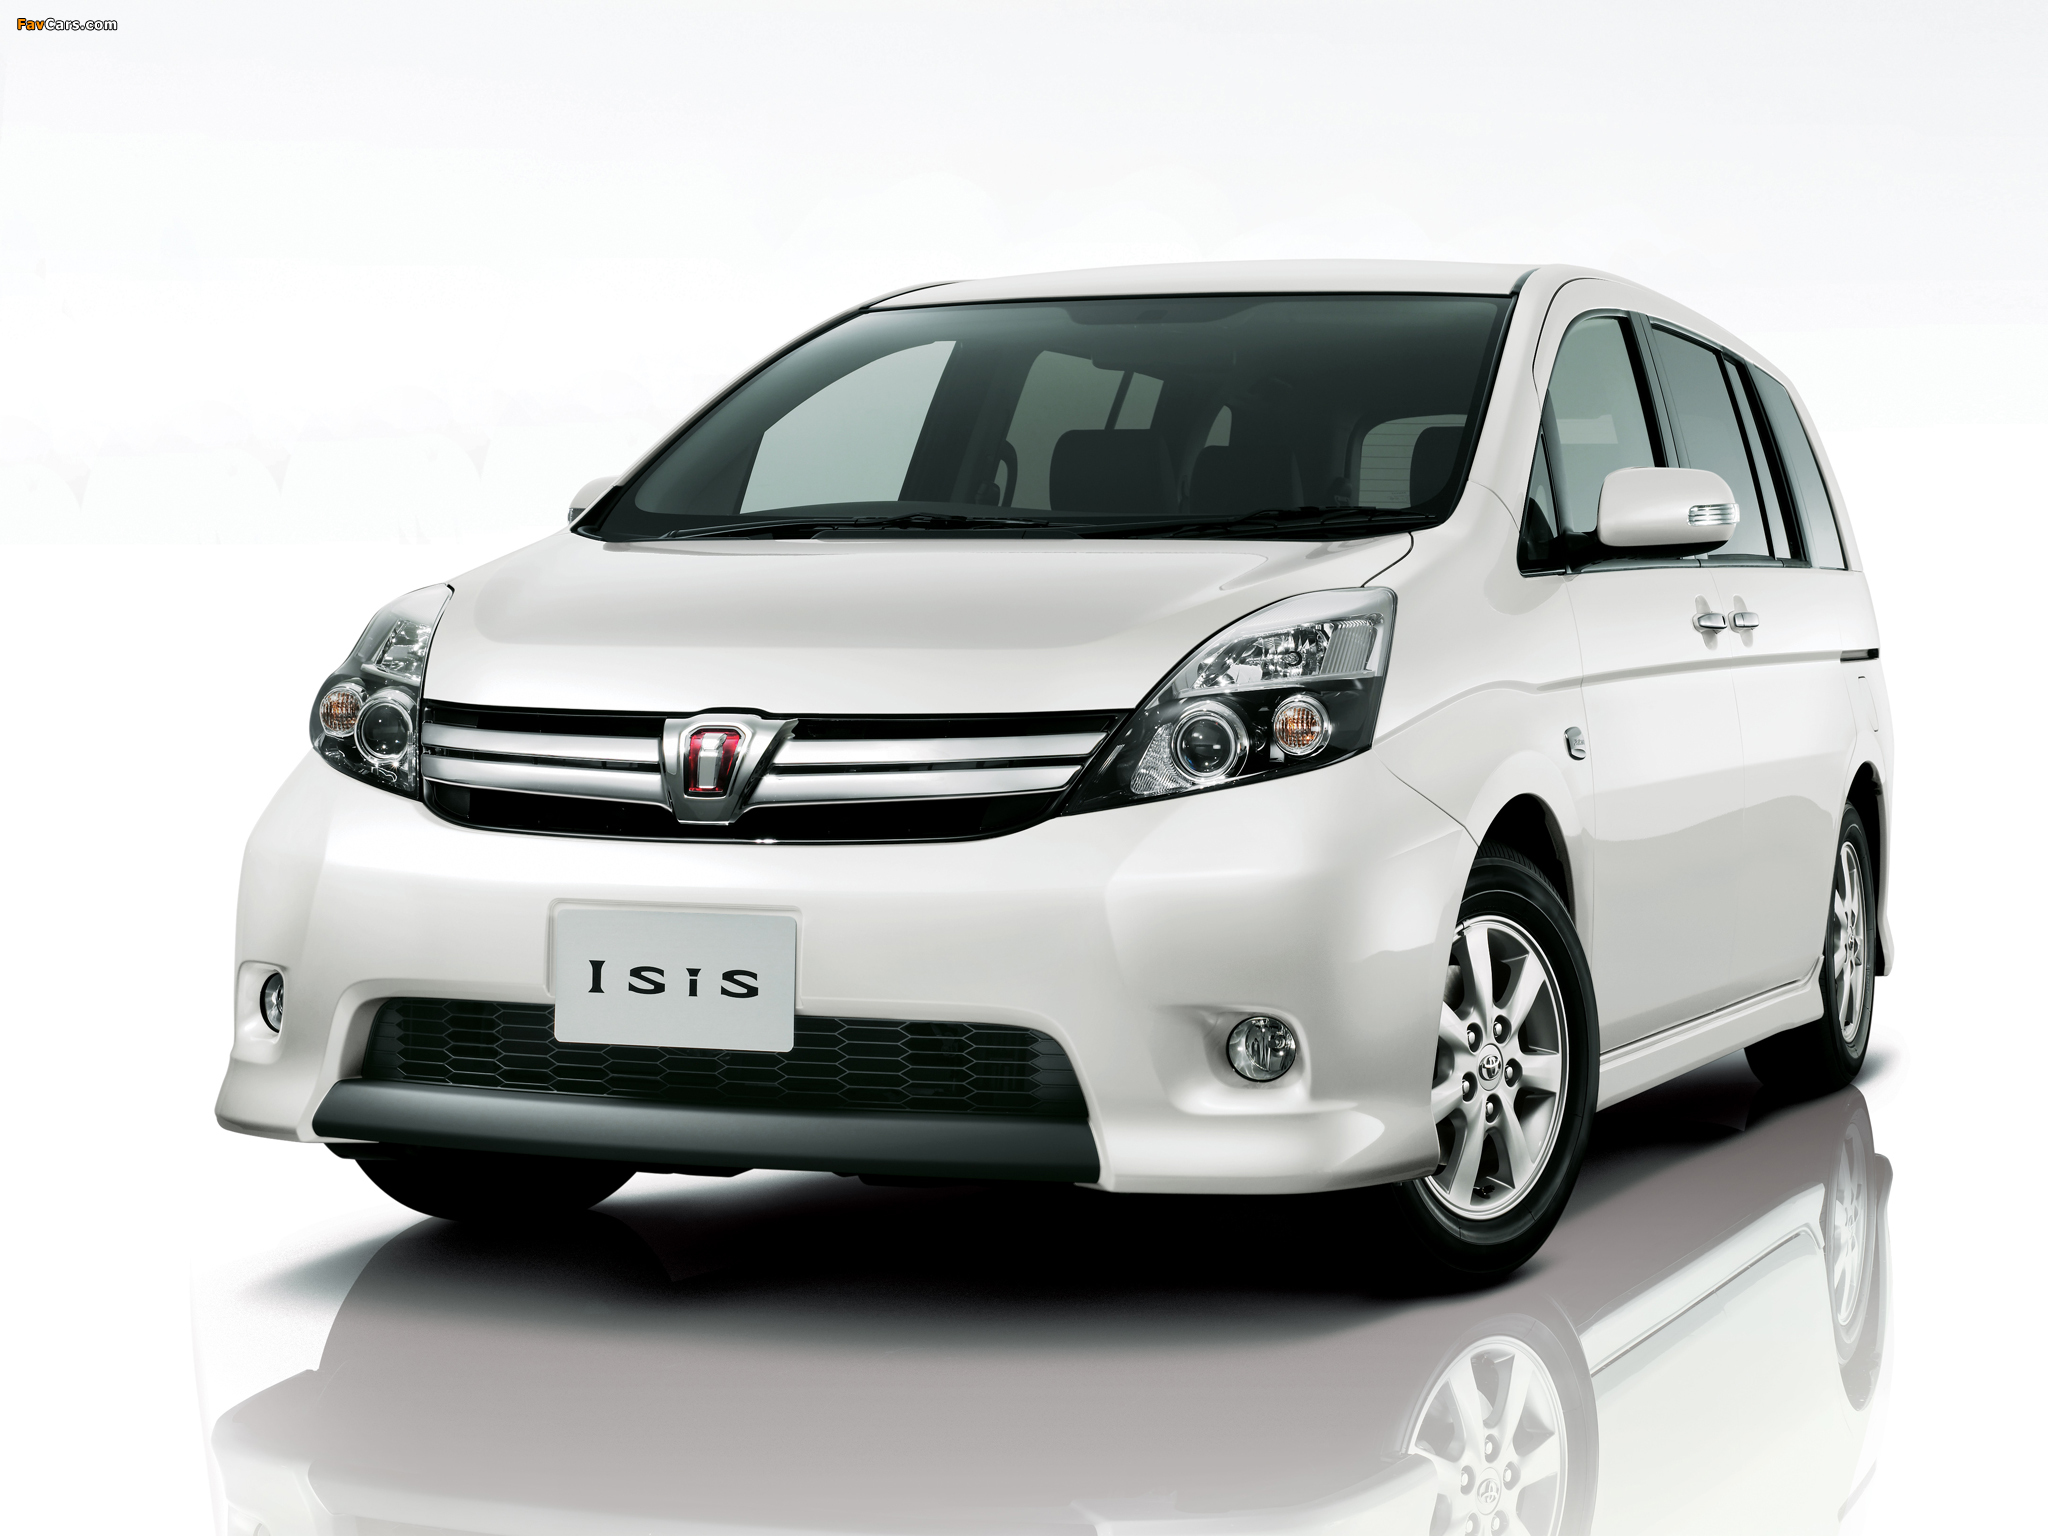 Toyota Isis Platana V Selection White Package 2011 photos (2048 x 1536)